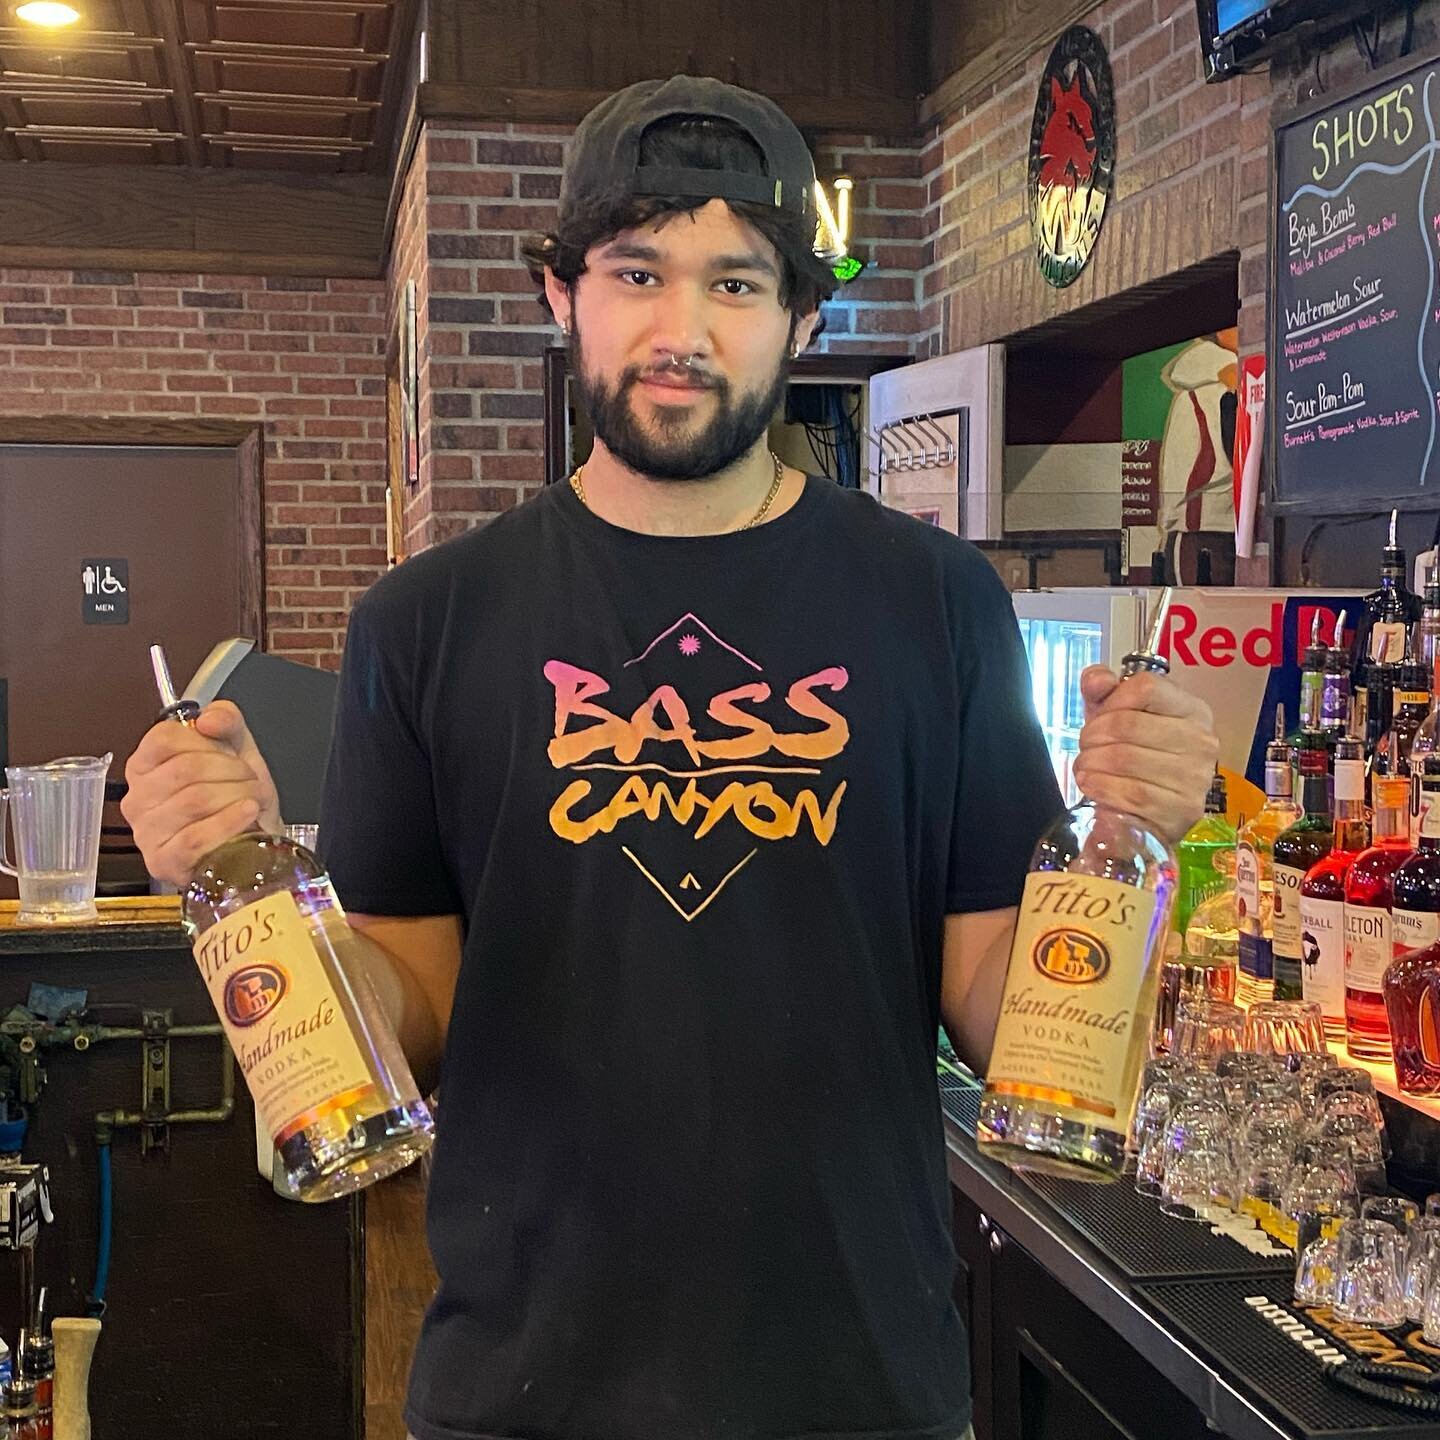 A big thank you to Tito&rsquo;s Vodka for their donation to JMR on behalf of our sponsor Club 301 as well as other establishments that serve Tito&rsquo;s including Cornerstone Pie, The Tav and The Porch! DJ Diego from Club 301 is ready to pour you a 